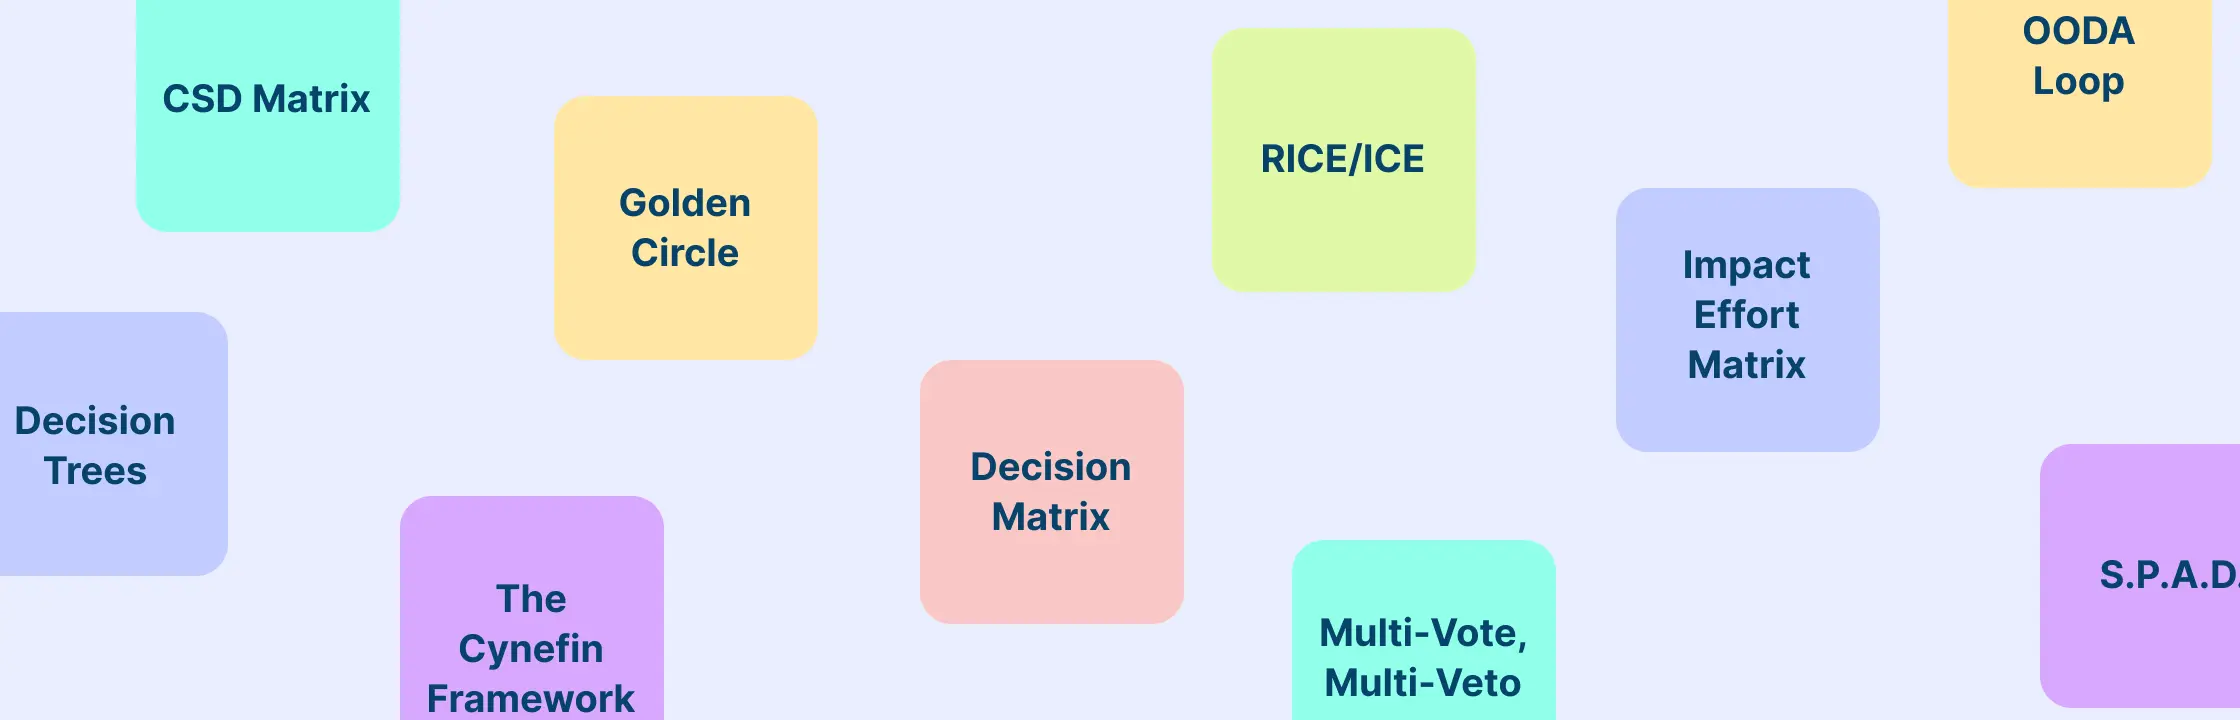 10 Decision Making Frameworks for Decisions That Drive Results